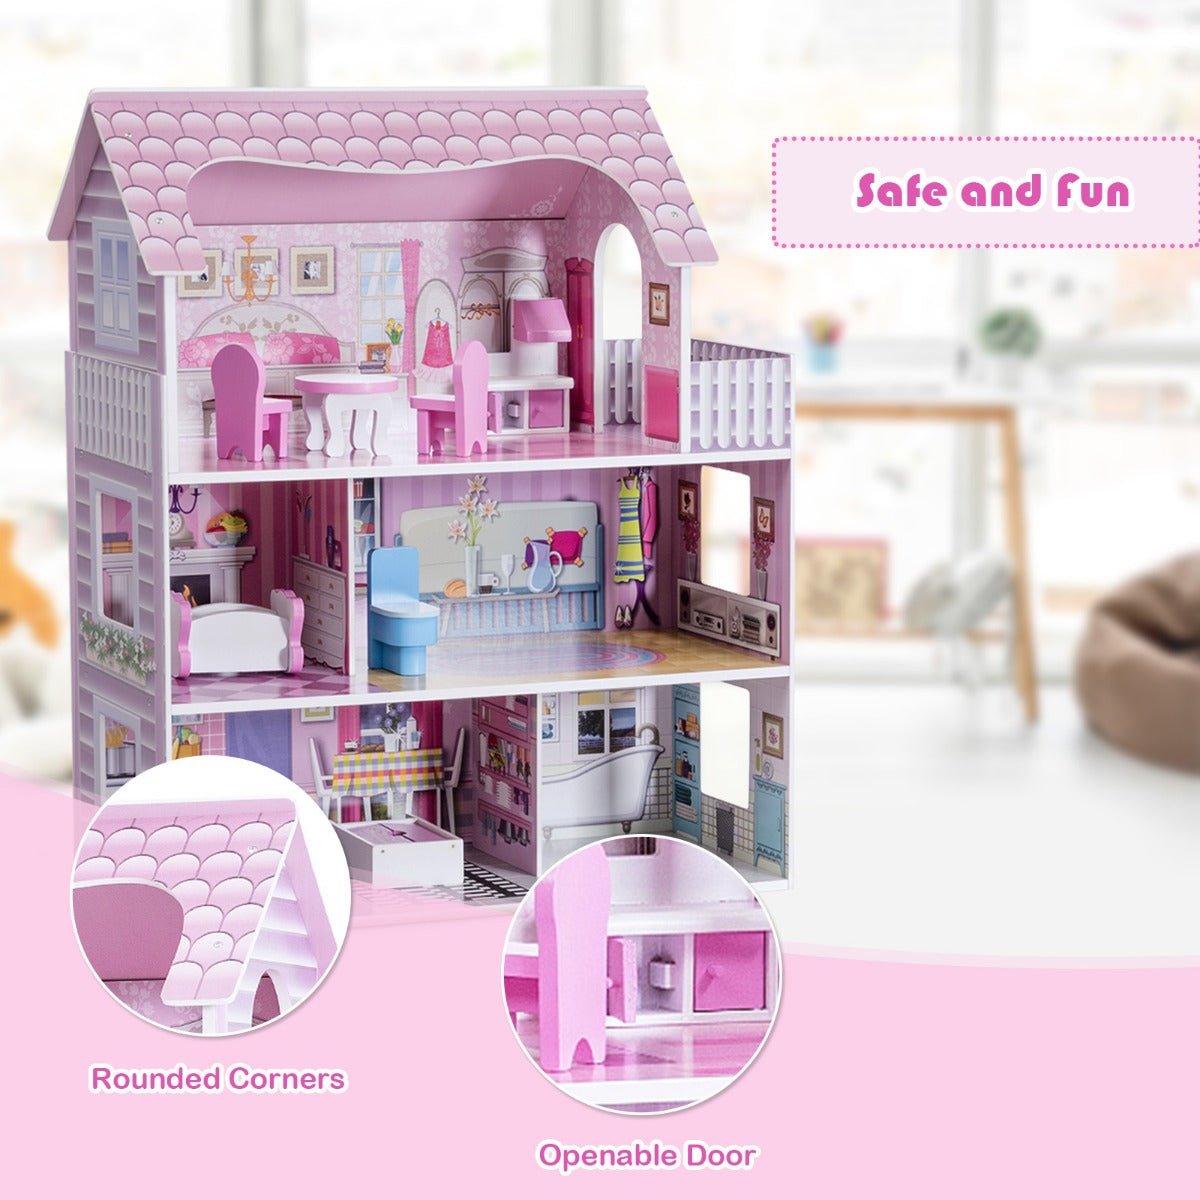 Create Magical Memories with a Large Dollhouse